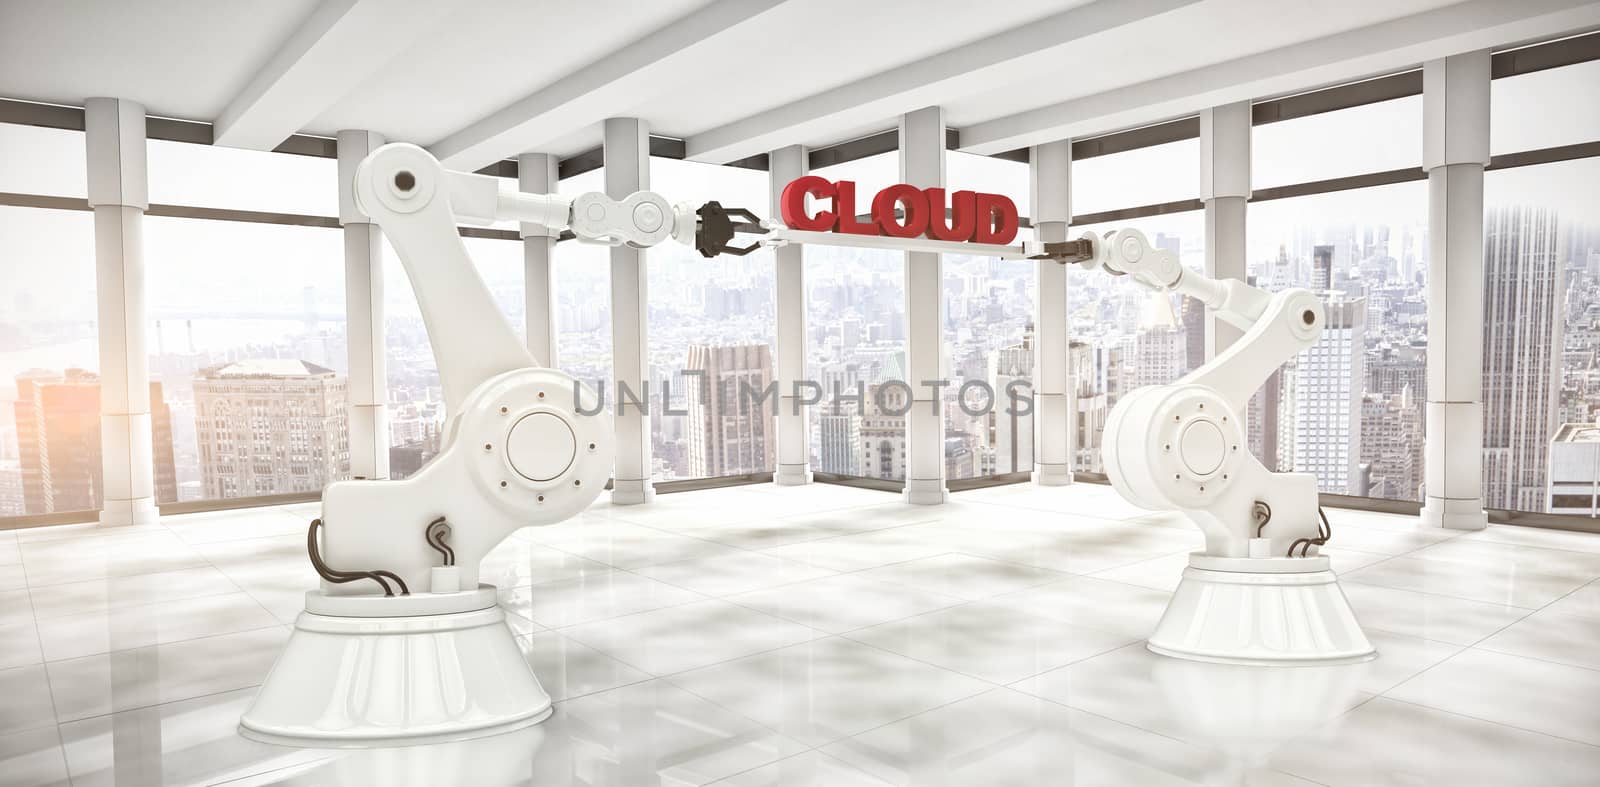 Robotic hands holding red cloud text over white background against modern room overlooking city